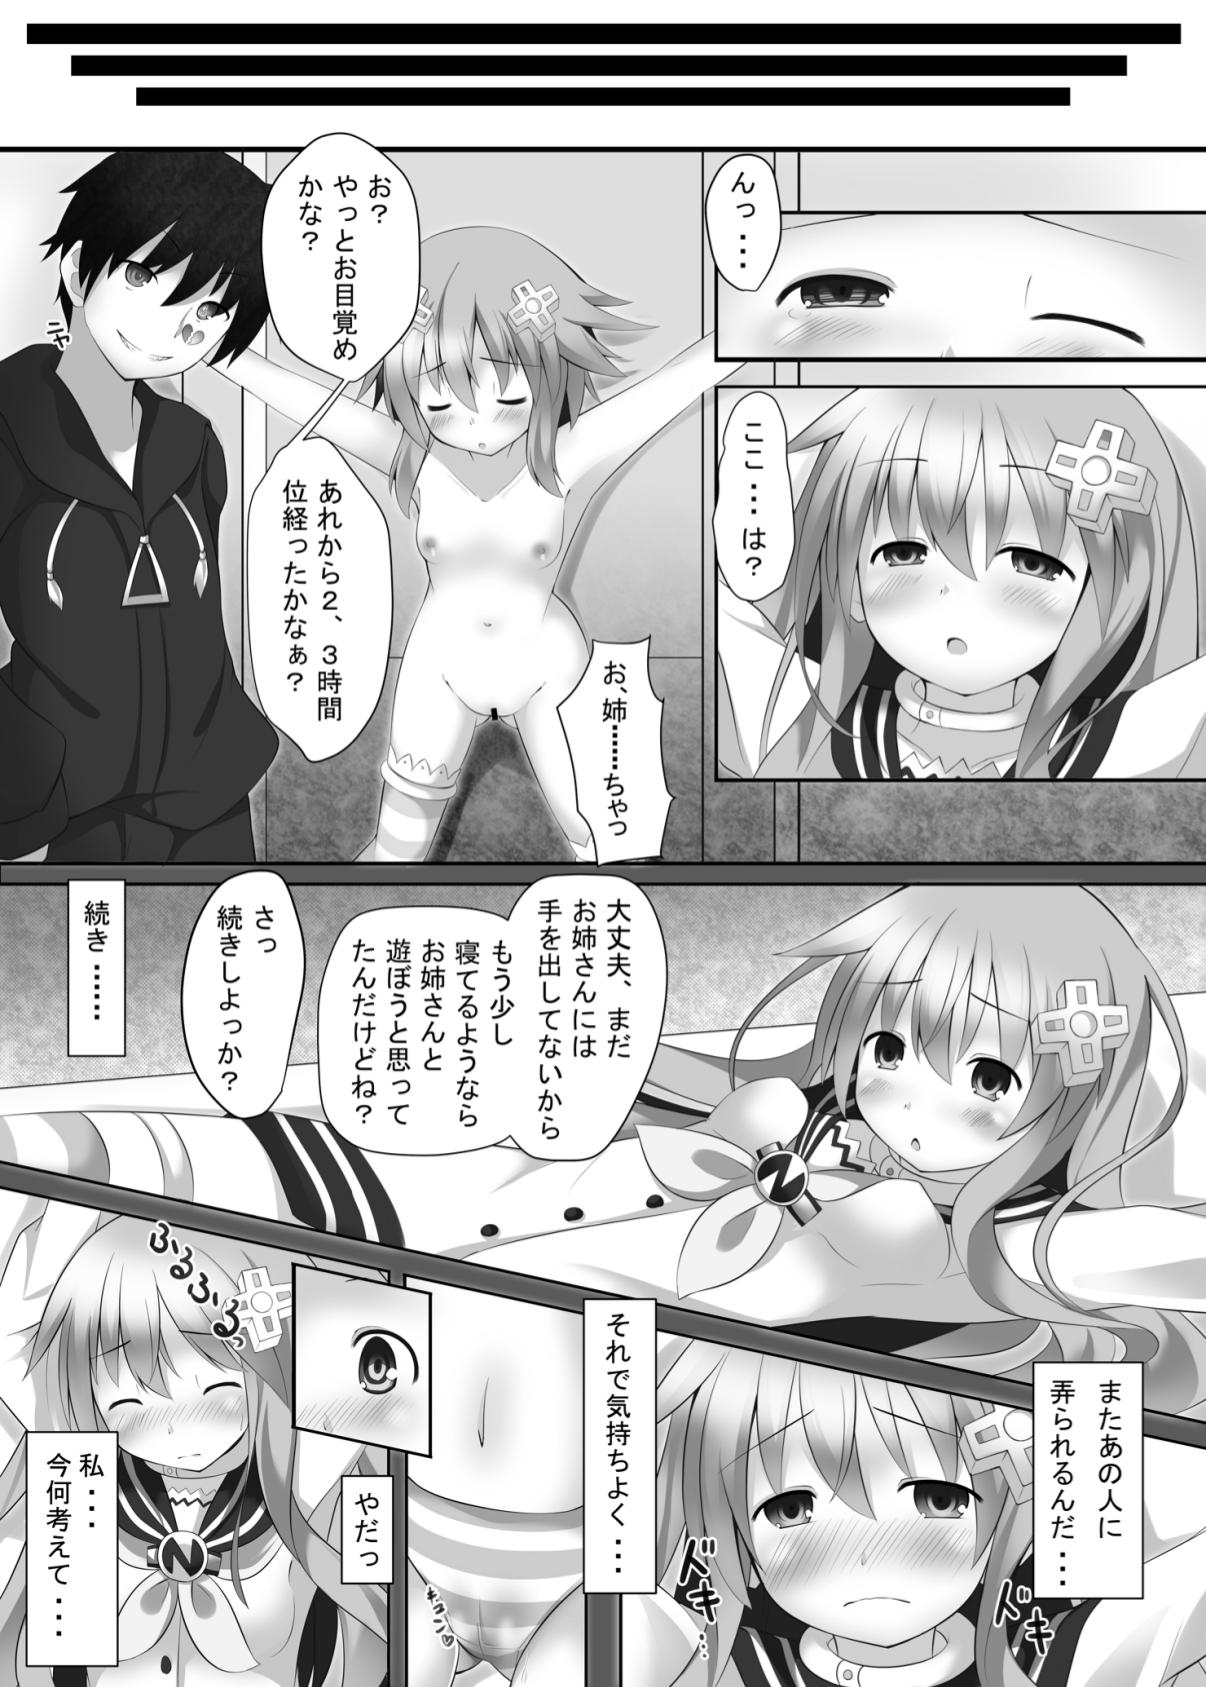 Best Blow Jobs Ever slave sister - Hyperdimension neptunia Reality - Page 12